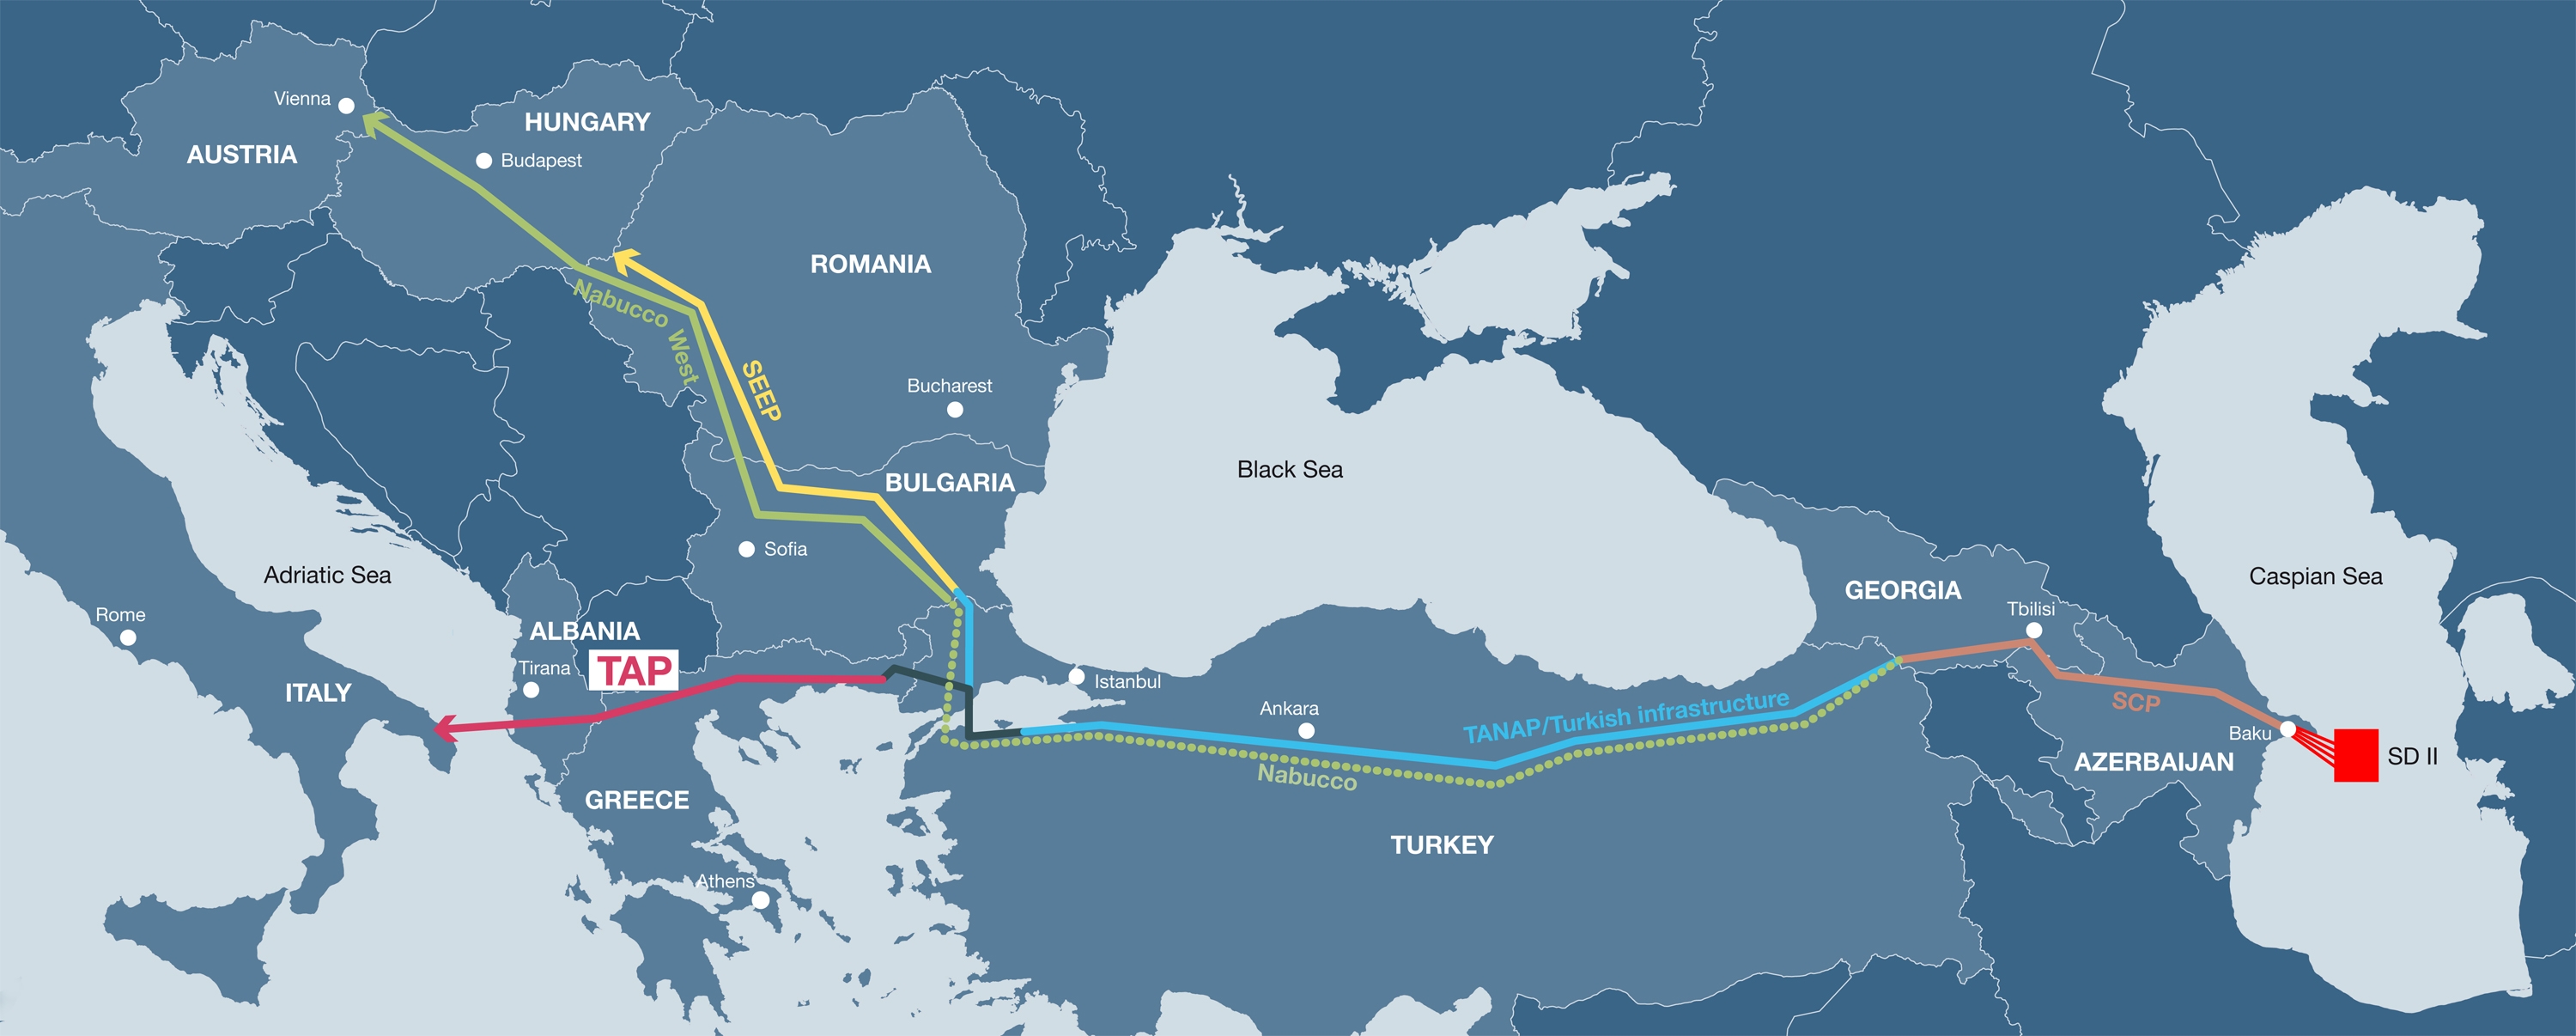 Energy Security for Europe: the Trans-Adriatic Pipeline (TAP)